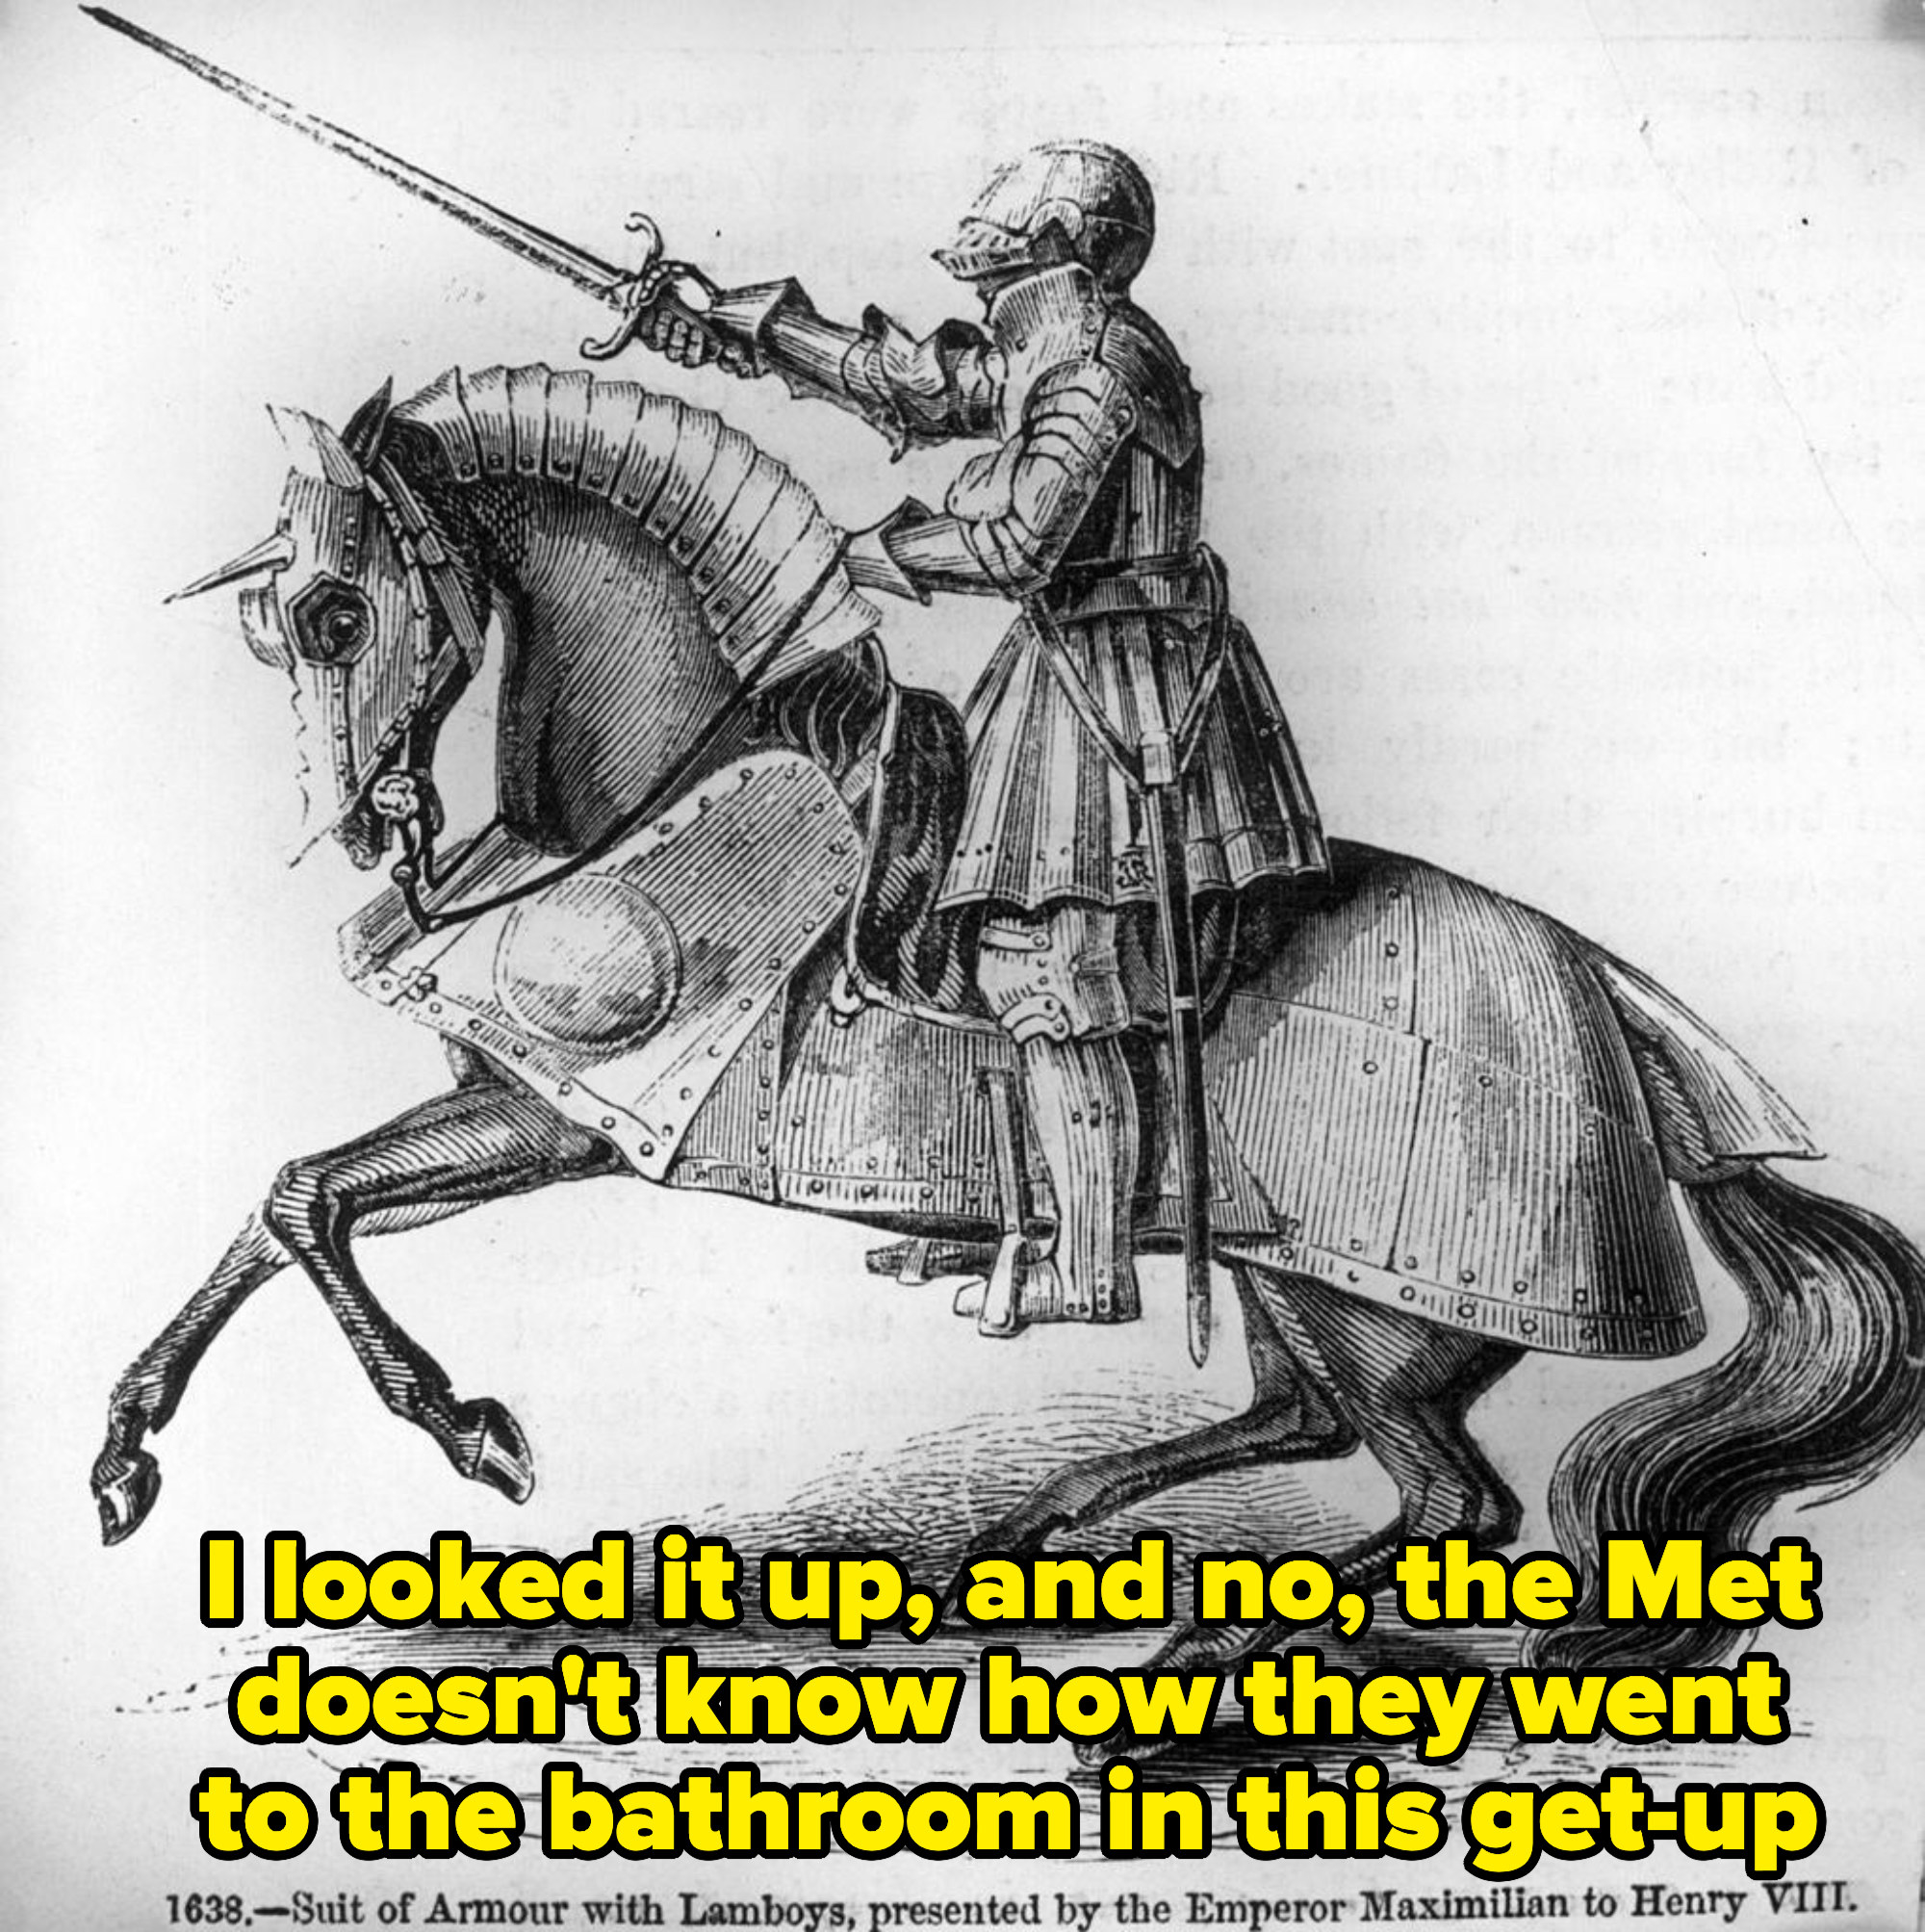 a knight on armor on horseback, with caption: I looked it up, and no, the Met doesn&#x27;t know how they went to the bathroom in this get-up